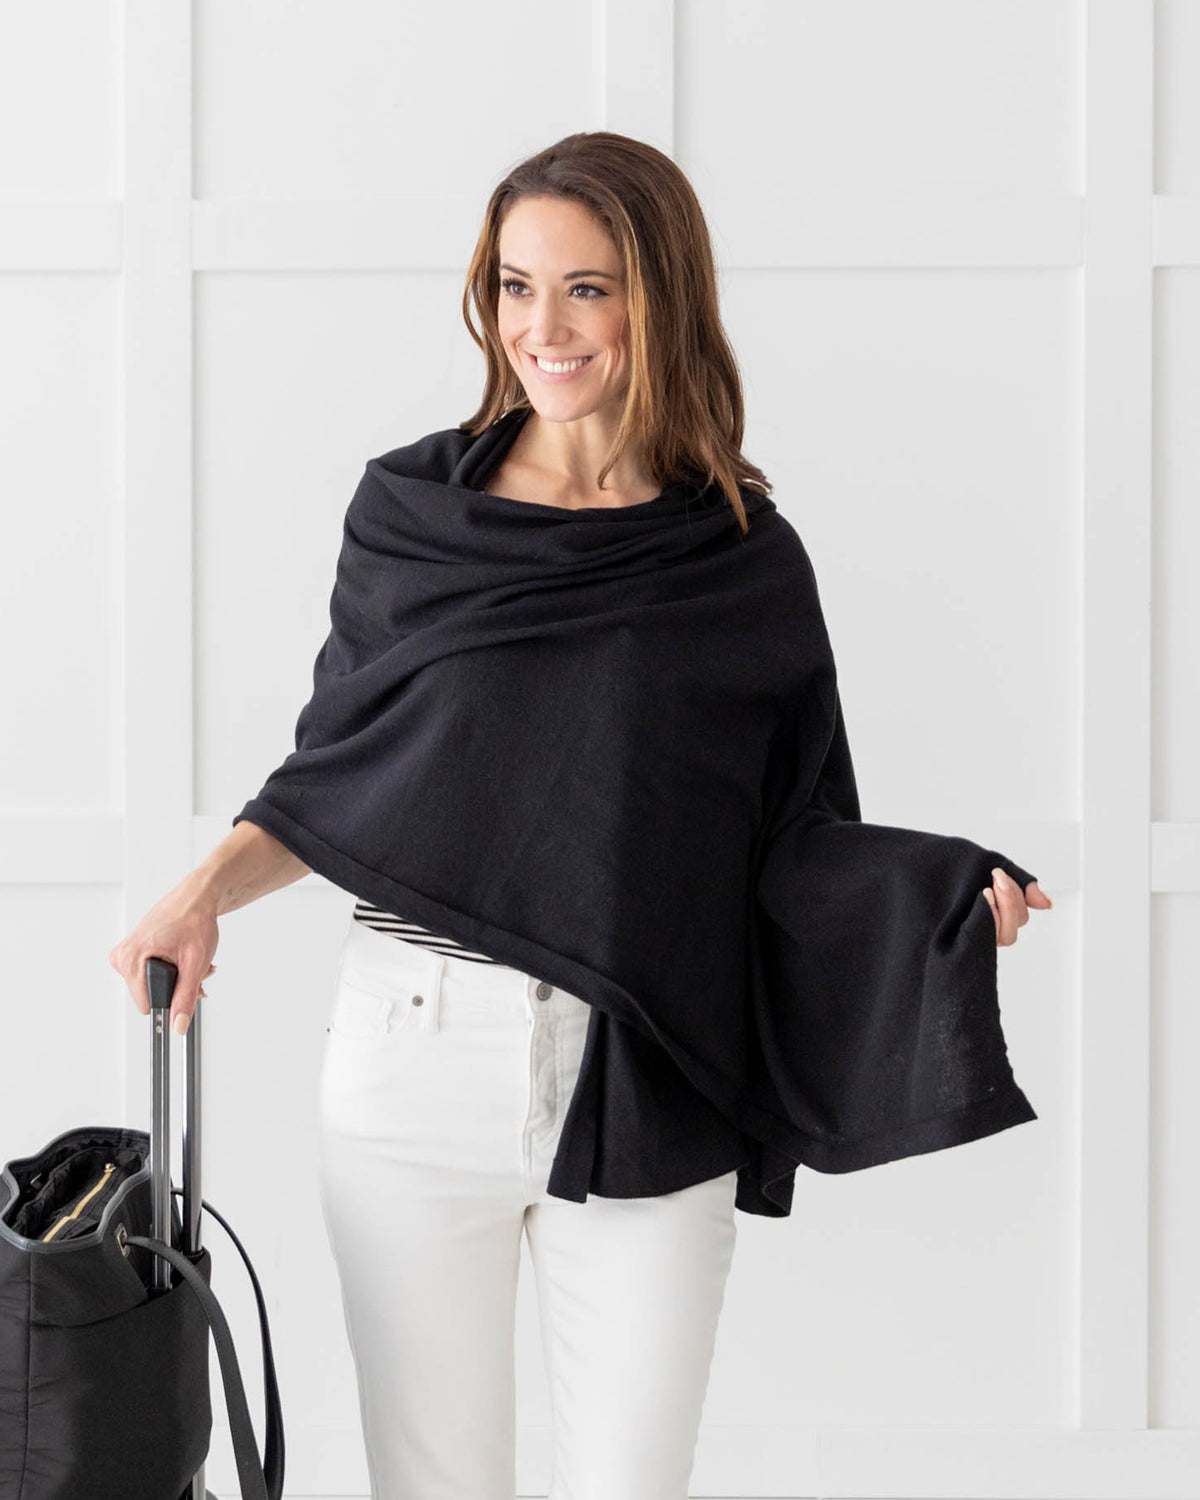 Woman wearing the Dreamsoft Travel Scarf in Black, pulling a suitcase